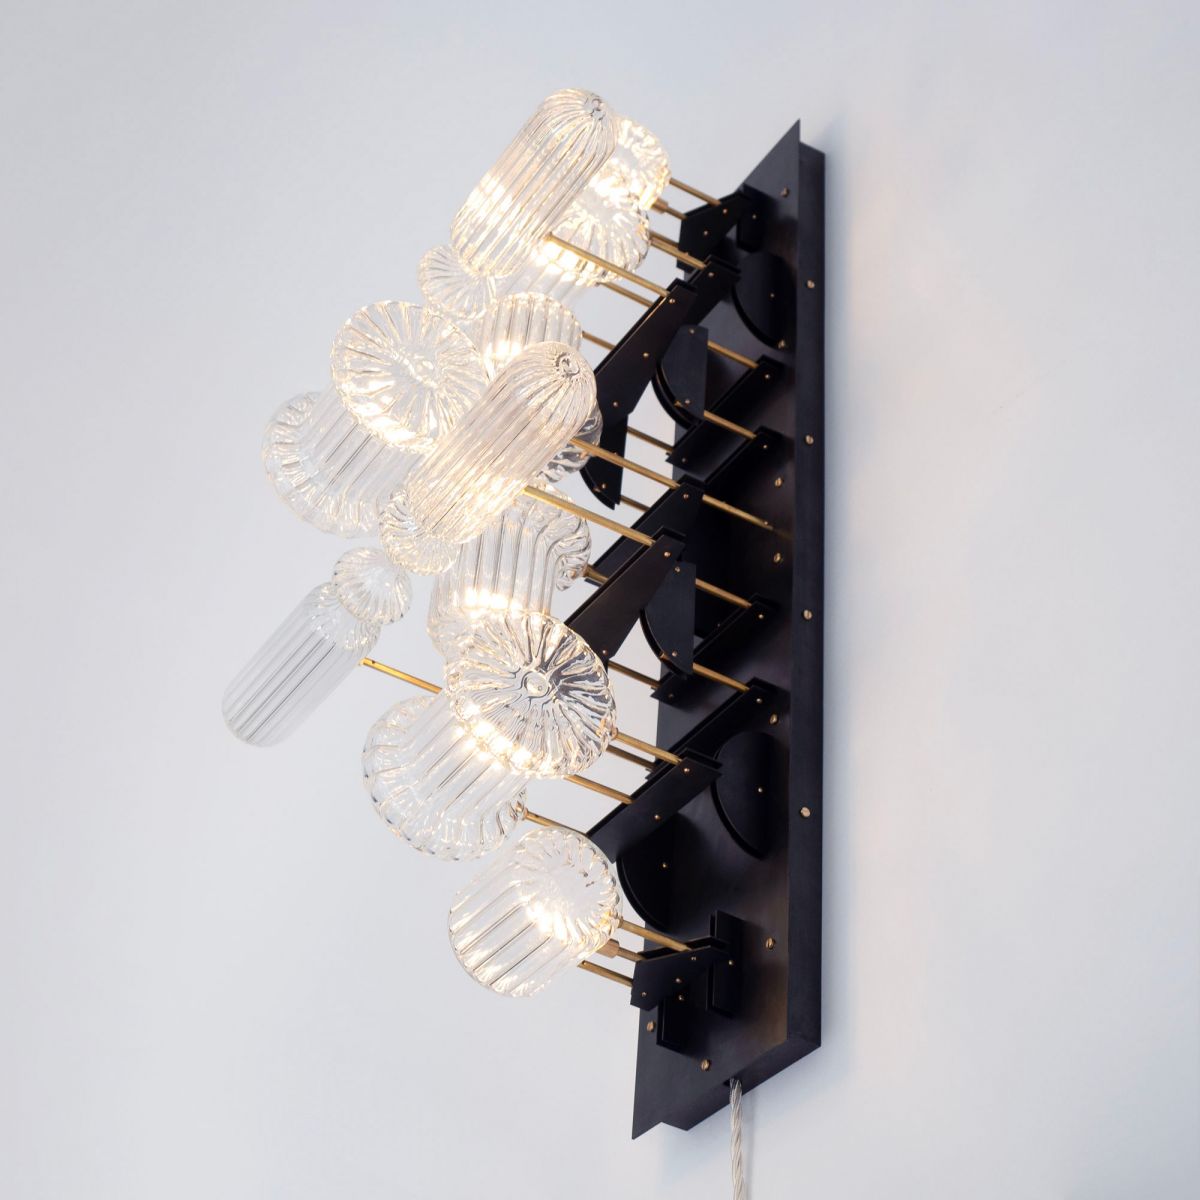 Sconce Bethan Laura Wood pic-1